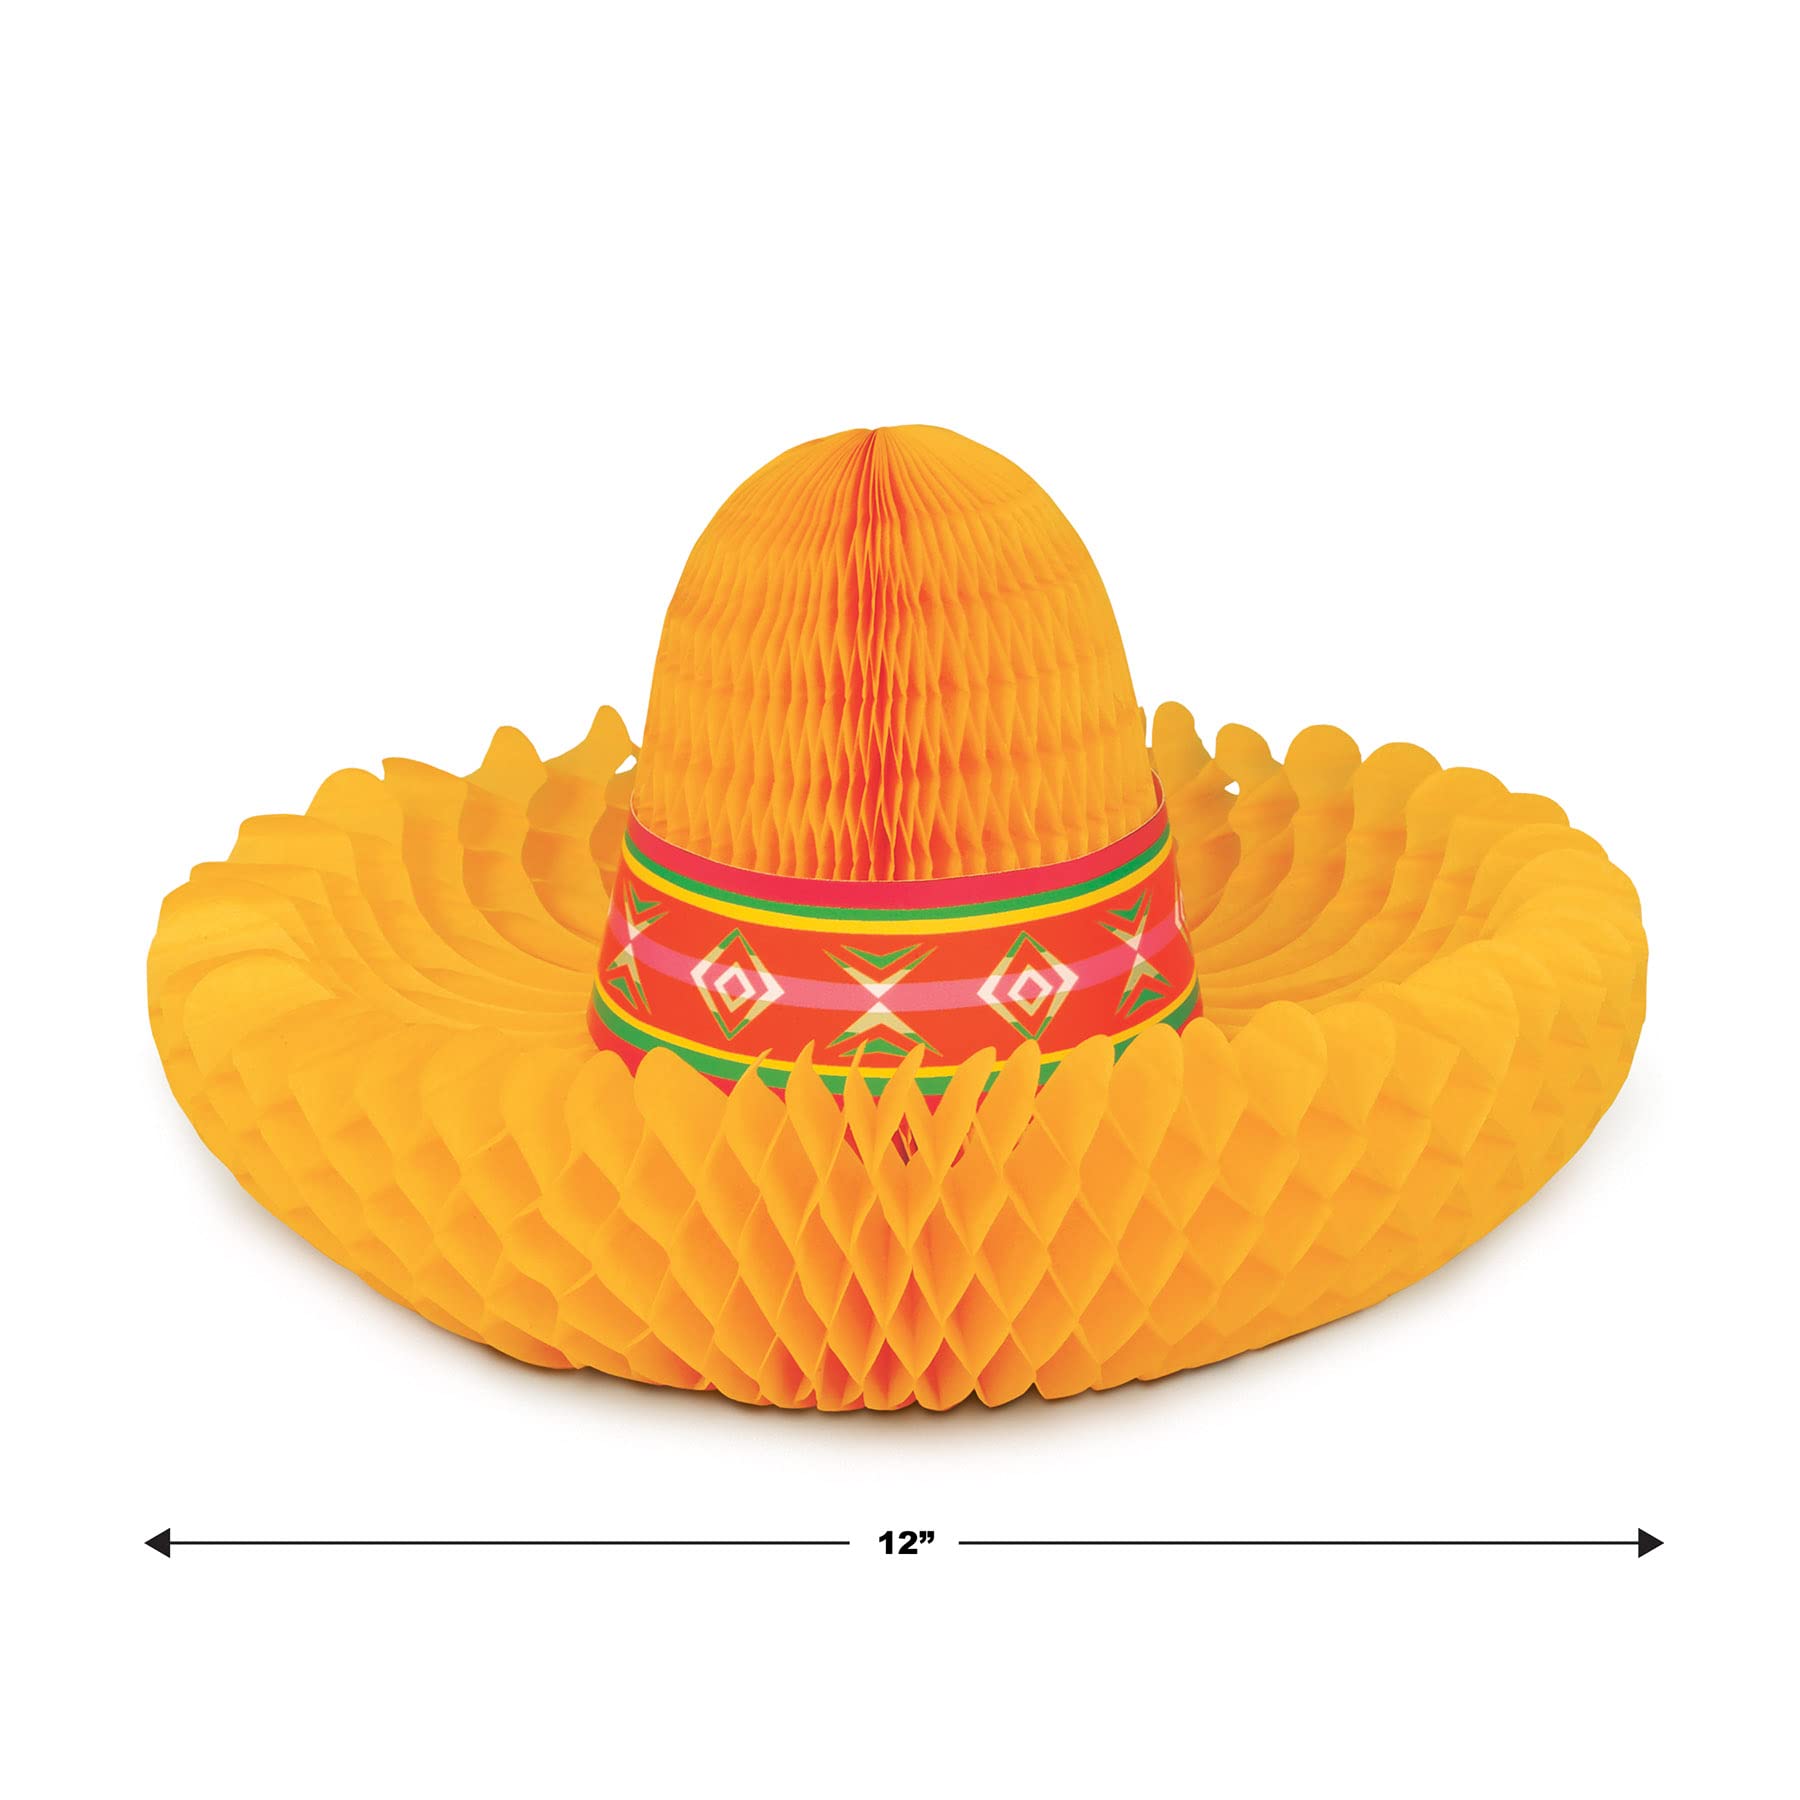 Beistle Tissue Paper Fiesta Sombrero Centerpiece Cinco De Mayo Mexican Theme Table Party Decorations Supplies, Yellow/Red/Green, 12